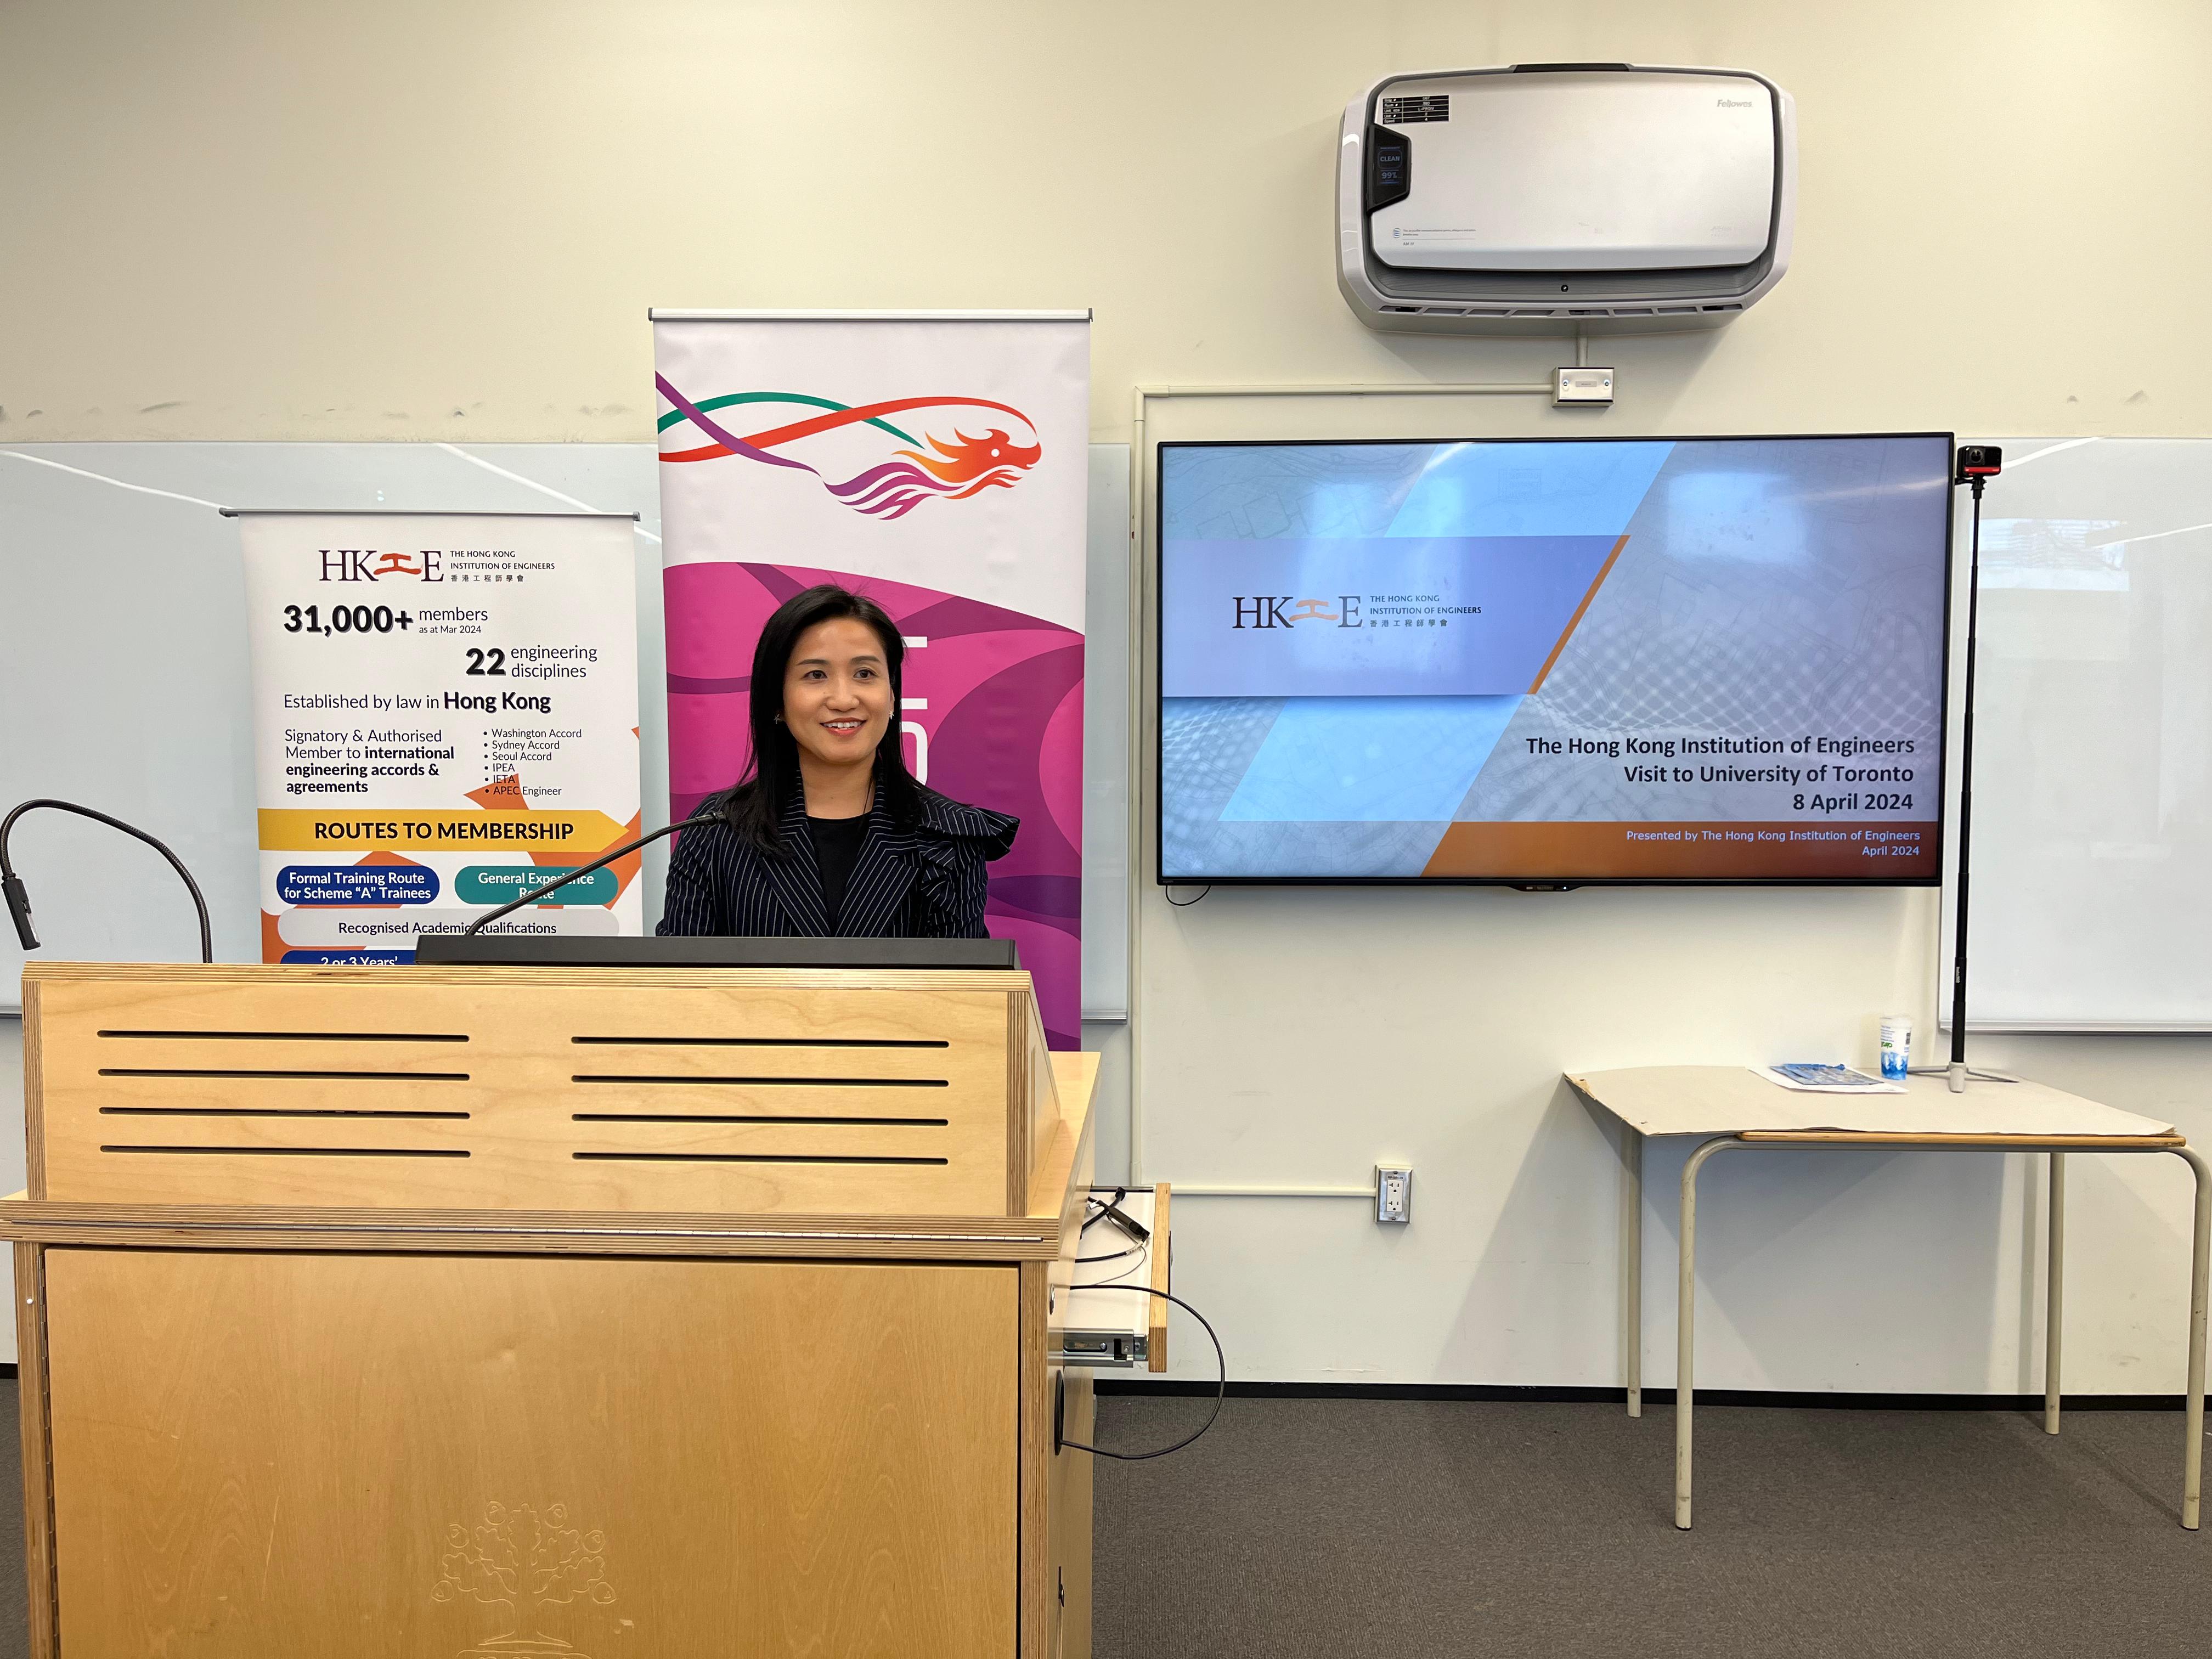 Director of the Hong Kong Economic and Trade Office (Toronto) (HKETO) Ms Emily Mo speaks at the student seminar titled “Engineering Prospects and Opportunities in Hong Kong” co-organised by HKETO and Hong Kong Institution of Engineers (HKIE) at University of Toronto on April 8. 